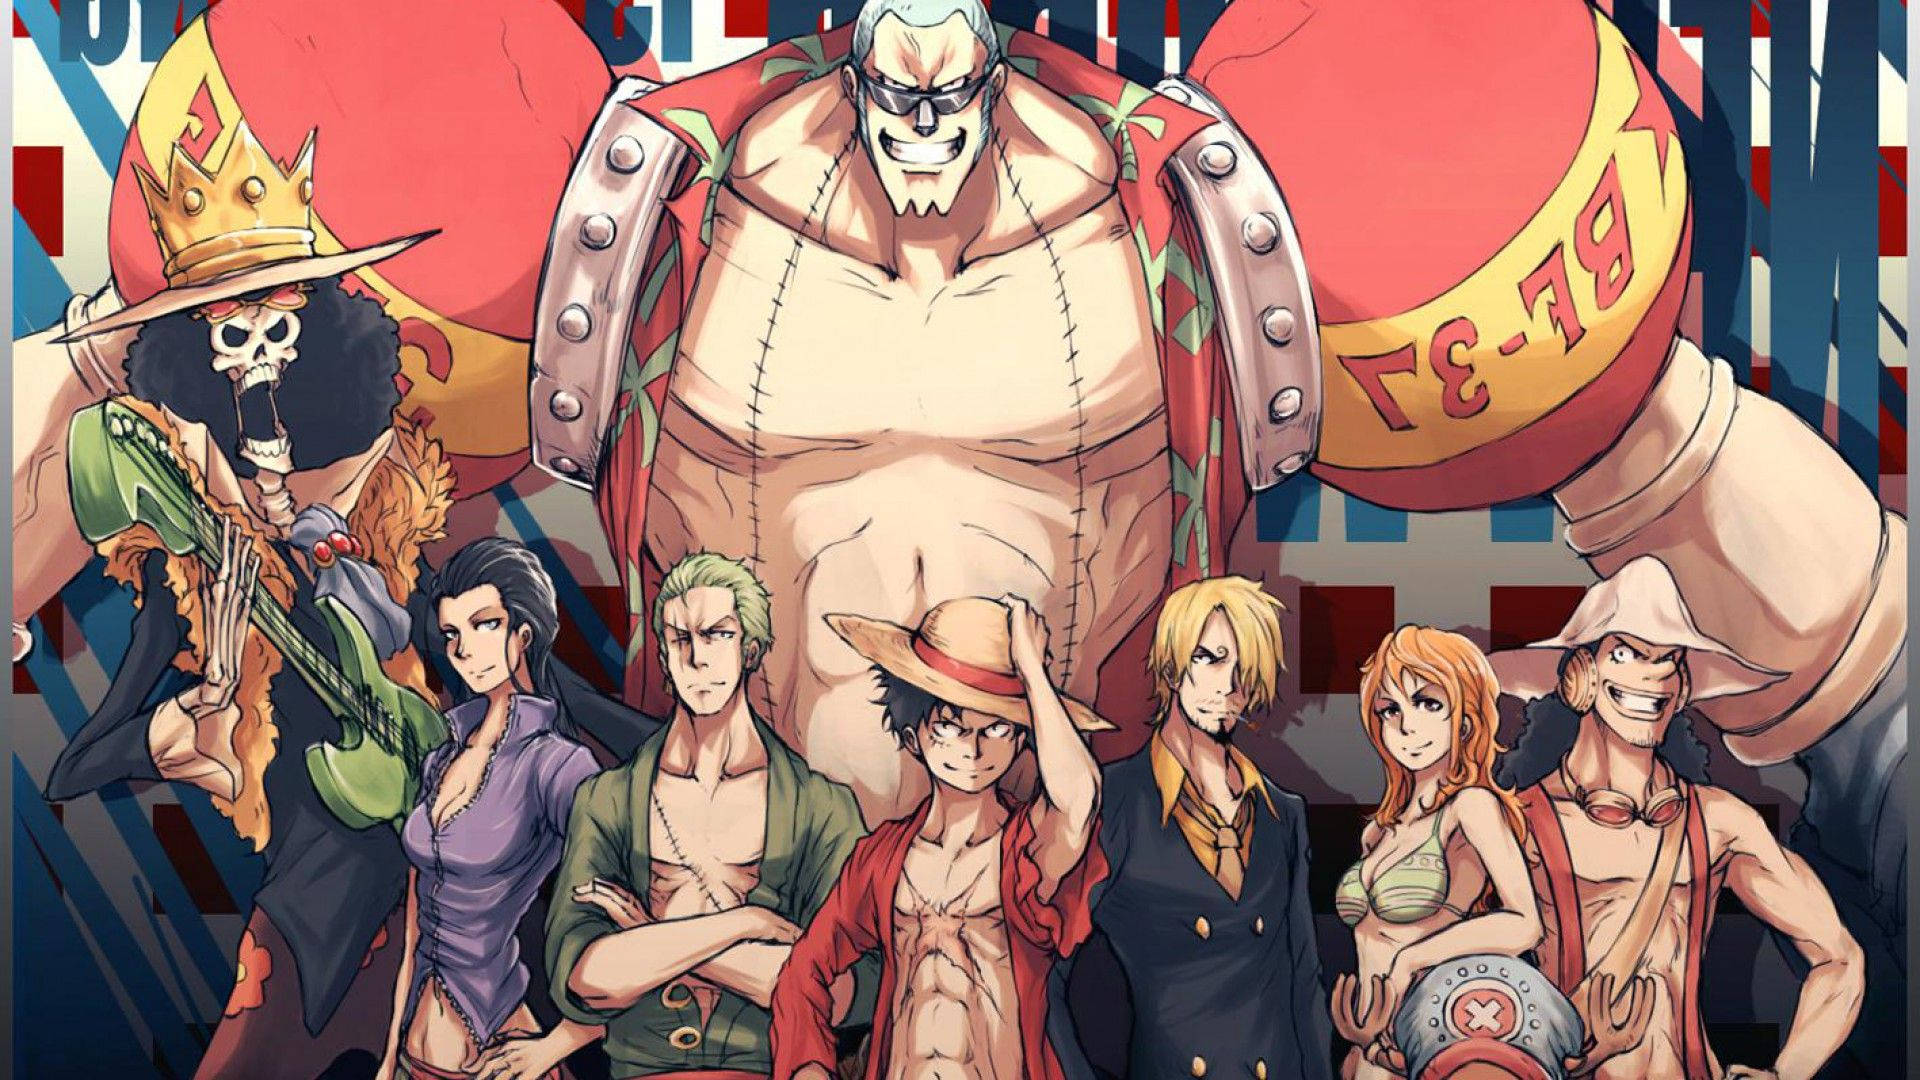 All hands on deck for the Straw Hat Crew! Wallpaper